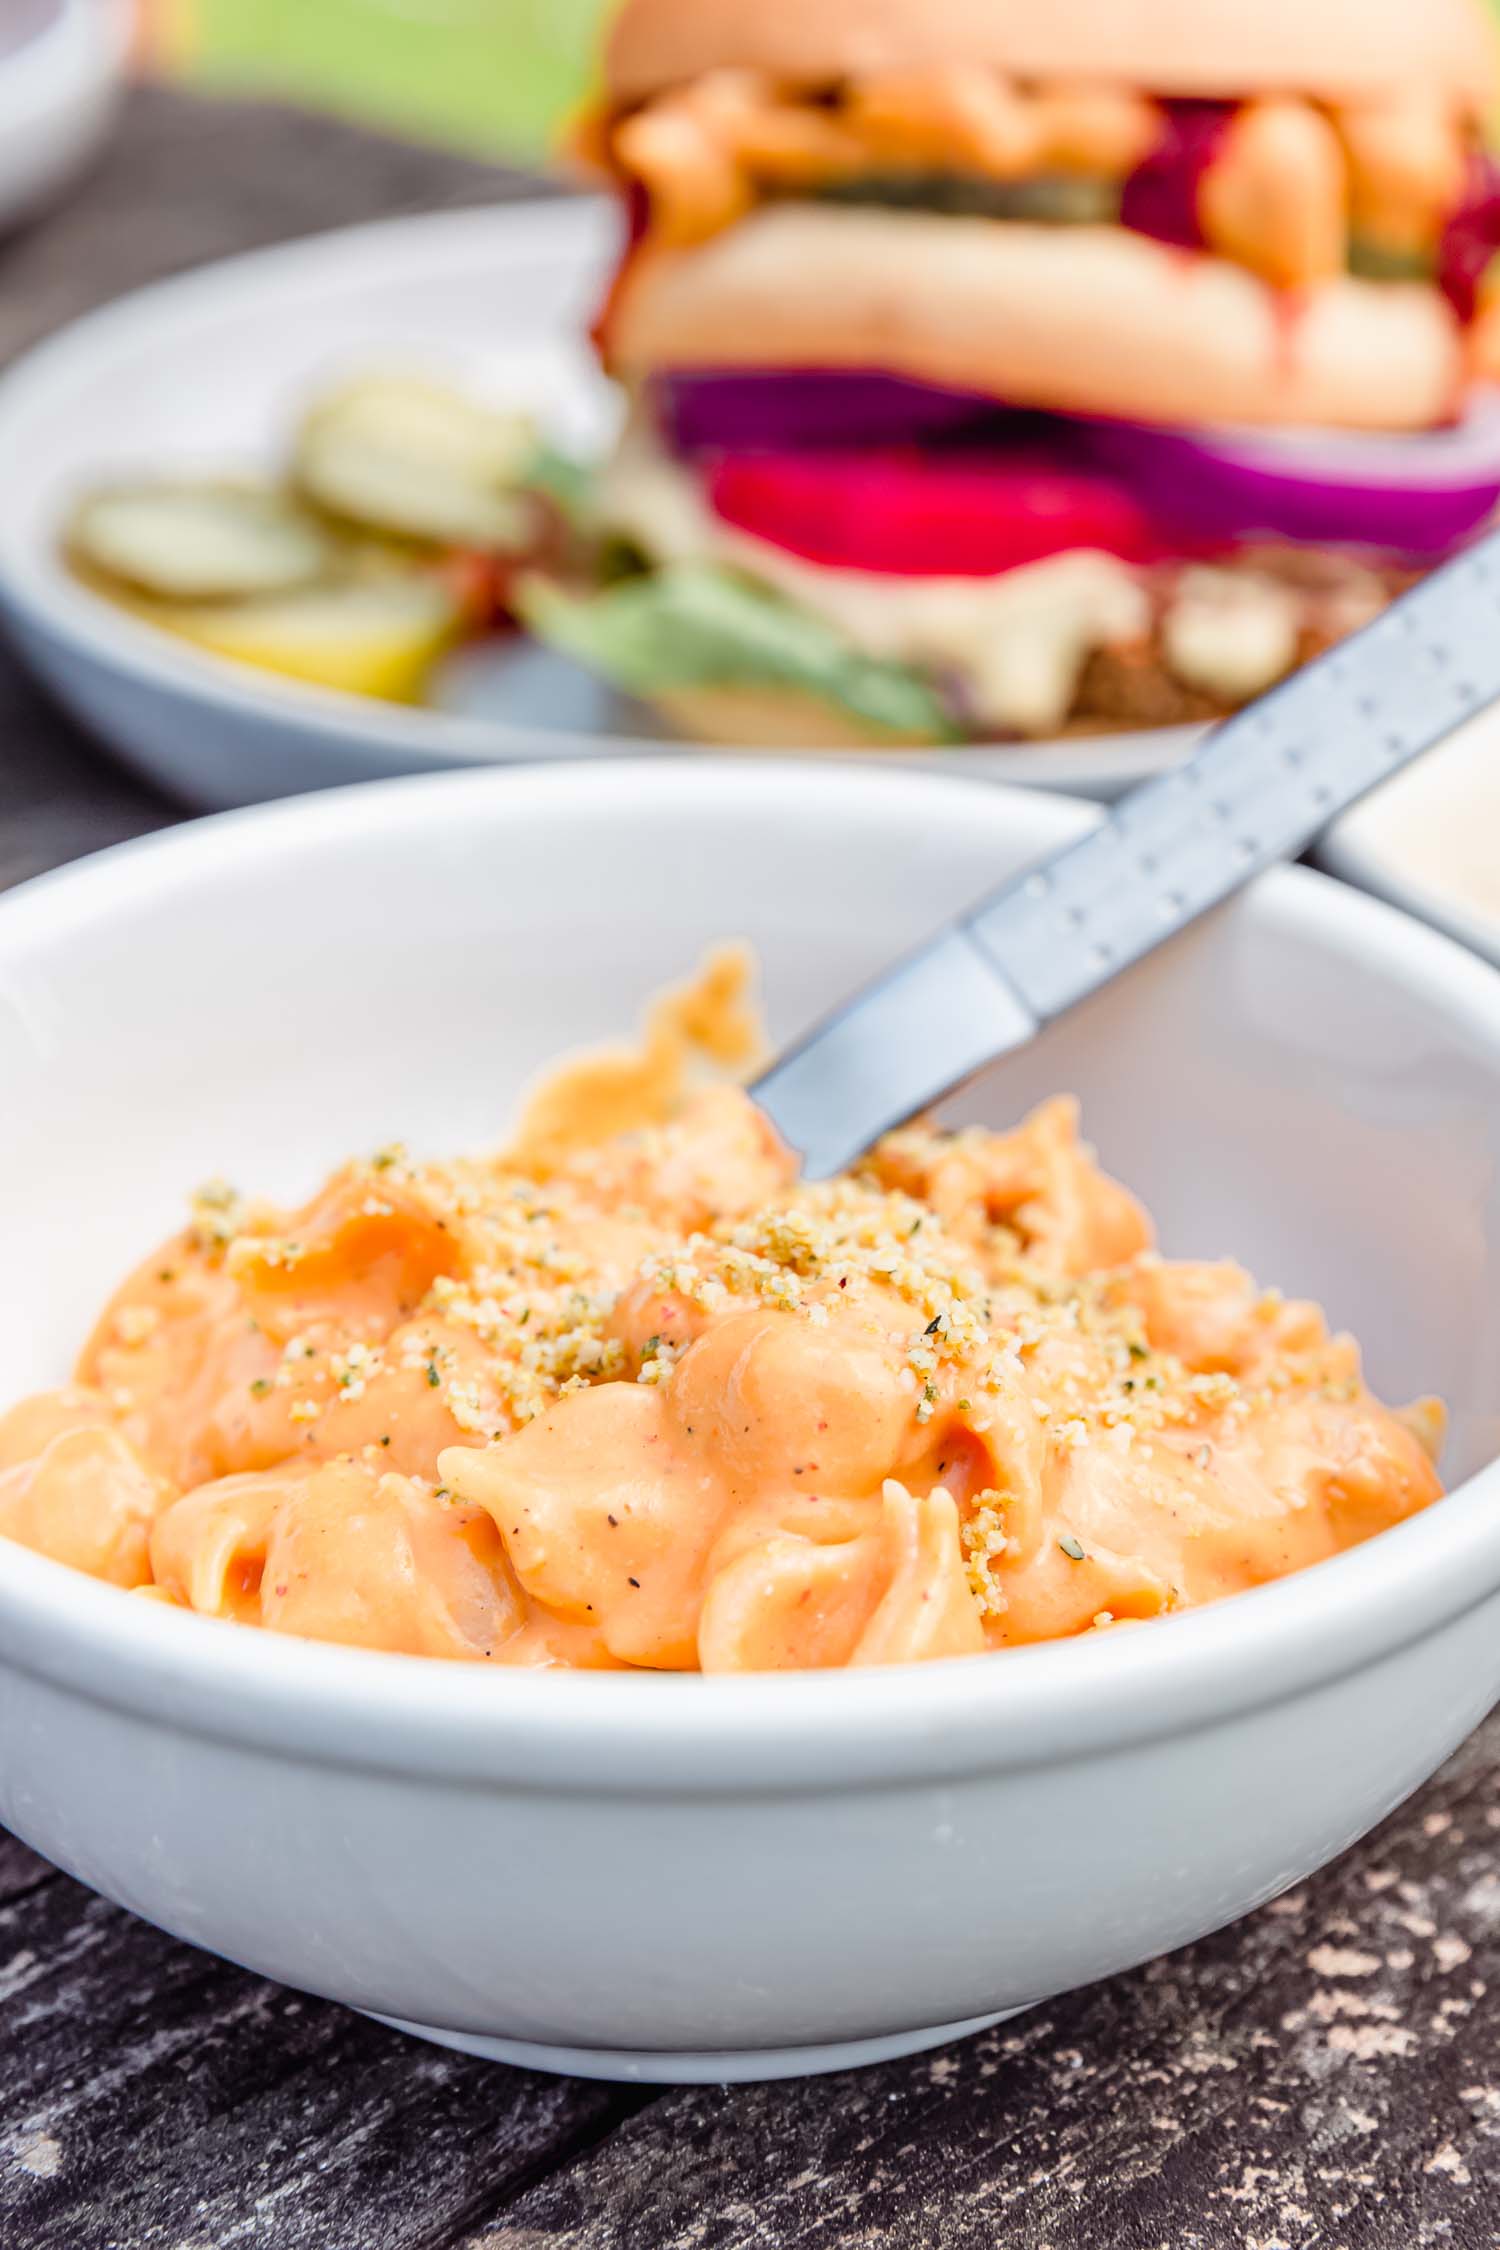 Easy Creamy Mac and Cheese with the Cheesiest Cheese Sauce, from Epic Vegan: Wild and Over-the-Top Plant-Based Recipes by Dustin Harder. Image by Kari of Beautiful Ingredient. #veganmacandcheese #vegankidrecipe #veganmacaroniandcheese #vegancheesesauce